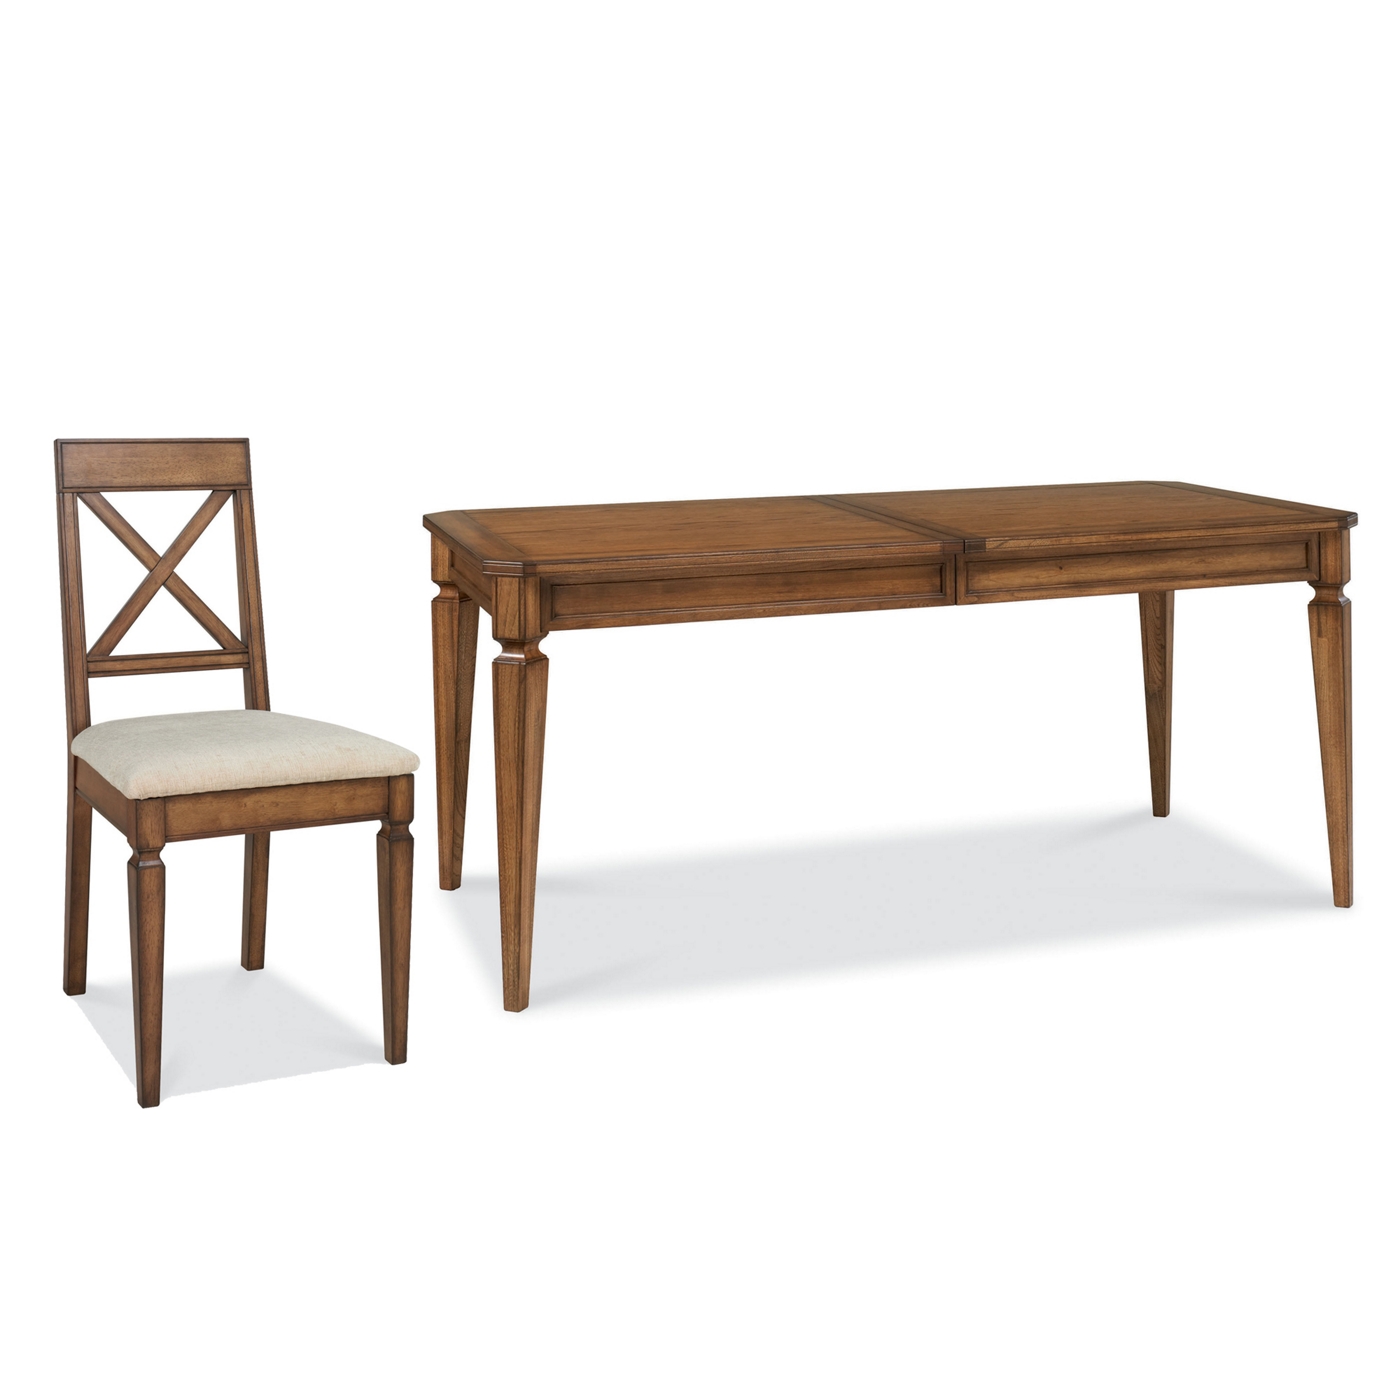 Oak Sophia large extending dining table with cross back chairs